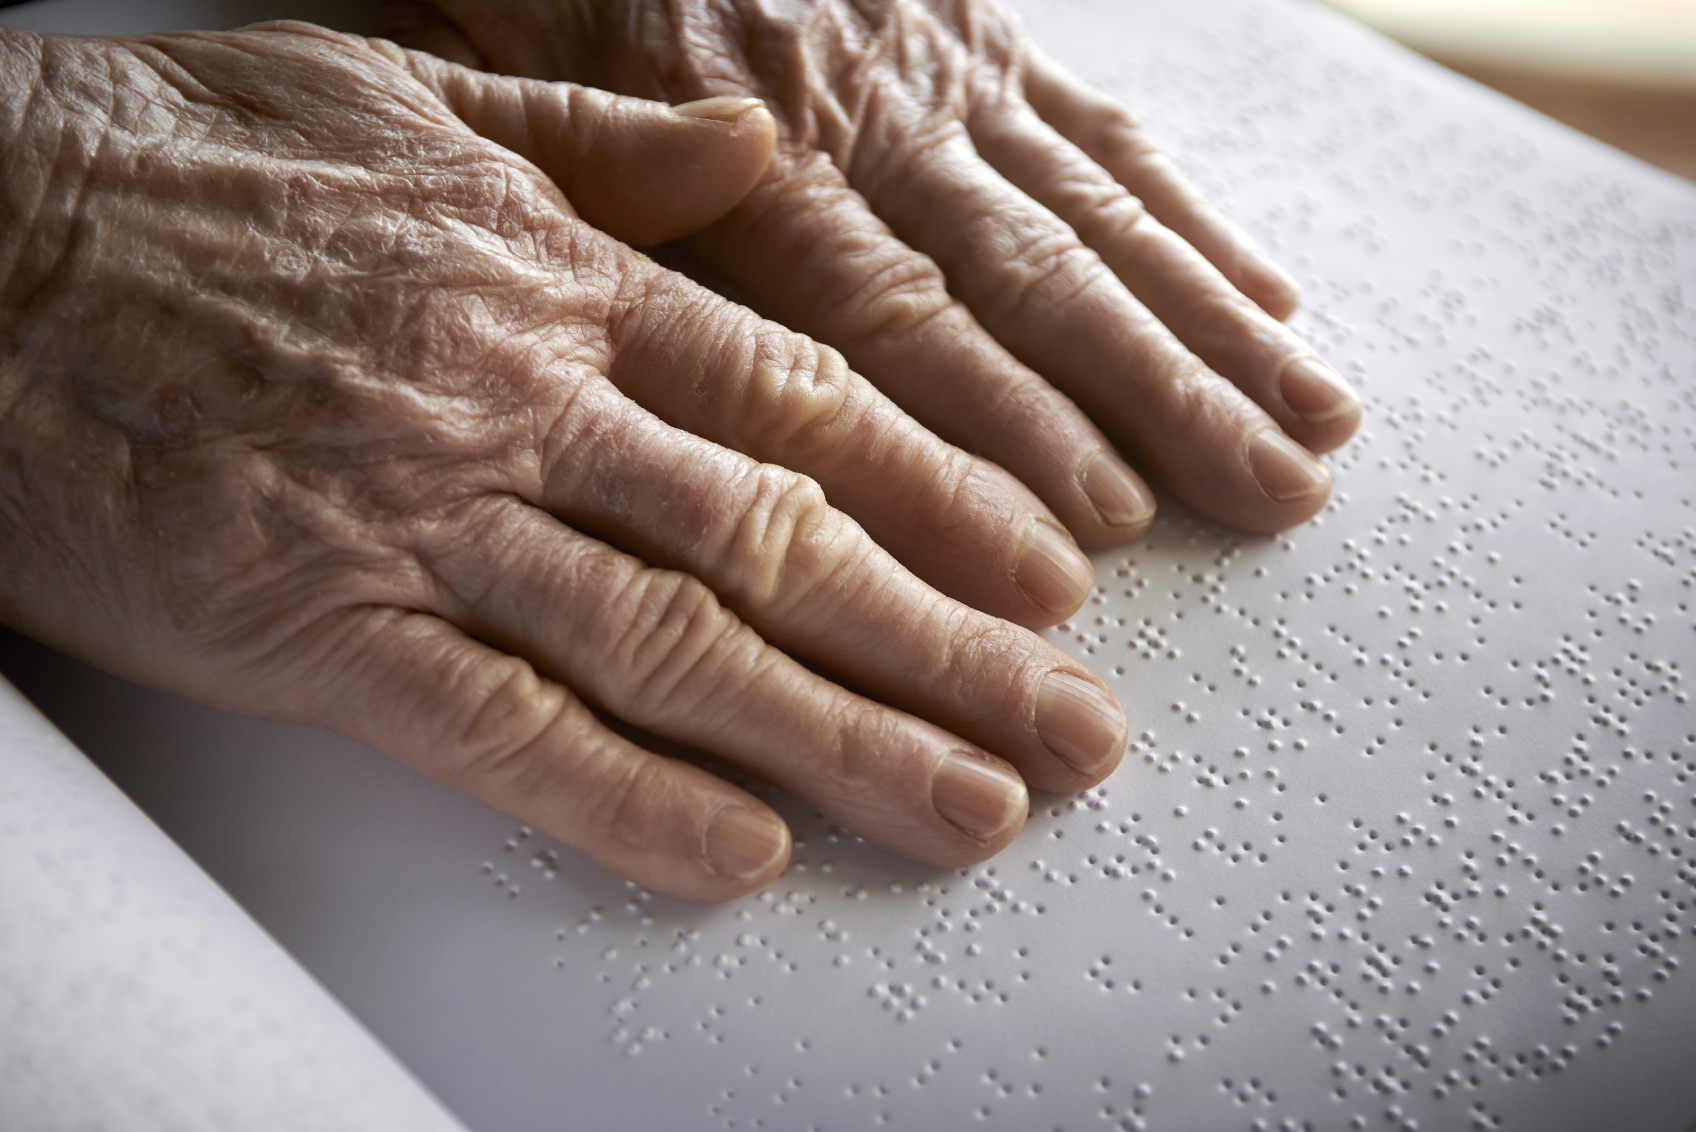 Old womans hands, reading a book with braille language